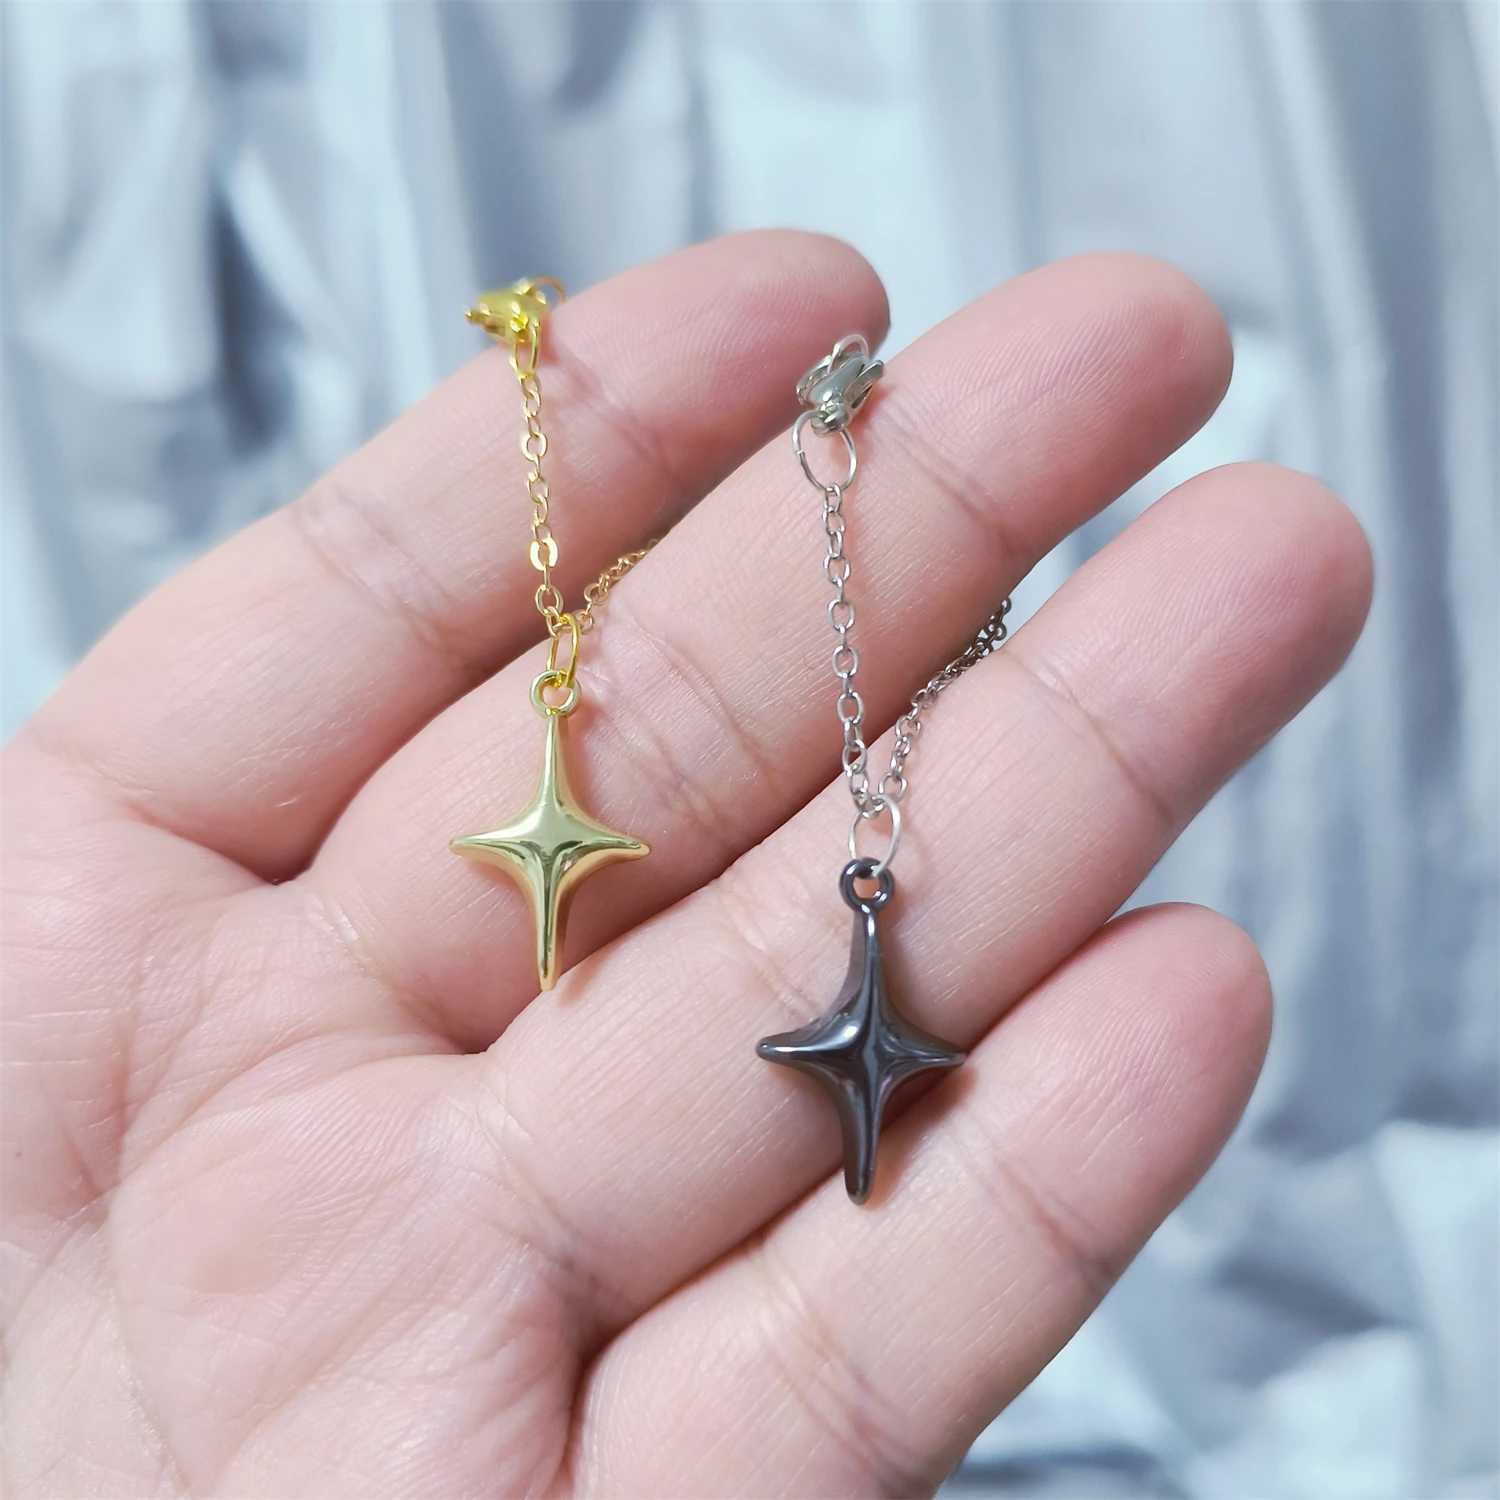 For BJD 1/6 Scale Blyth OB Doll Size Simulation Big Star Necklace Mini Tiny Accessories Decoration Alloy Prop Fashion 1 18 scale diecast g63 suv off road alloy car model simulation ornaments boy gifts toy collection